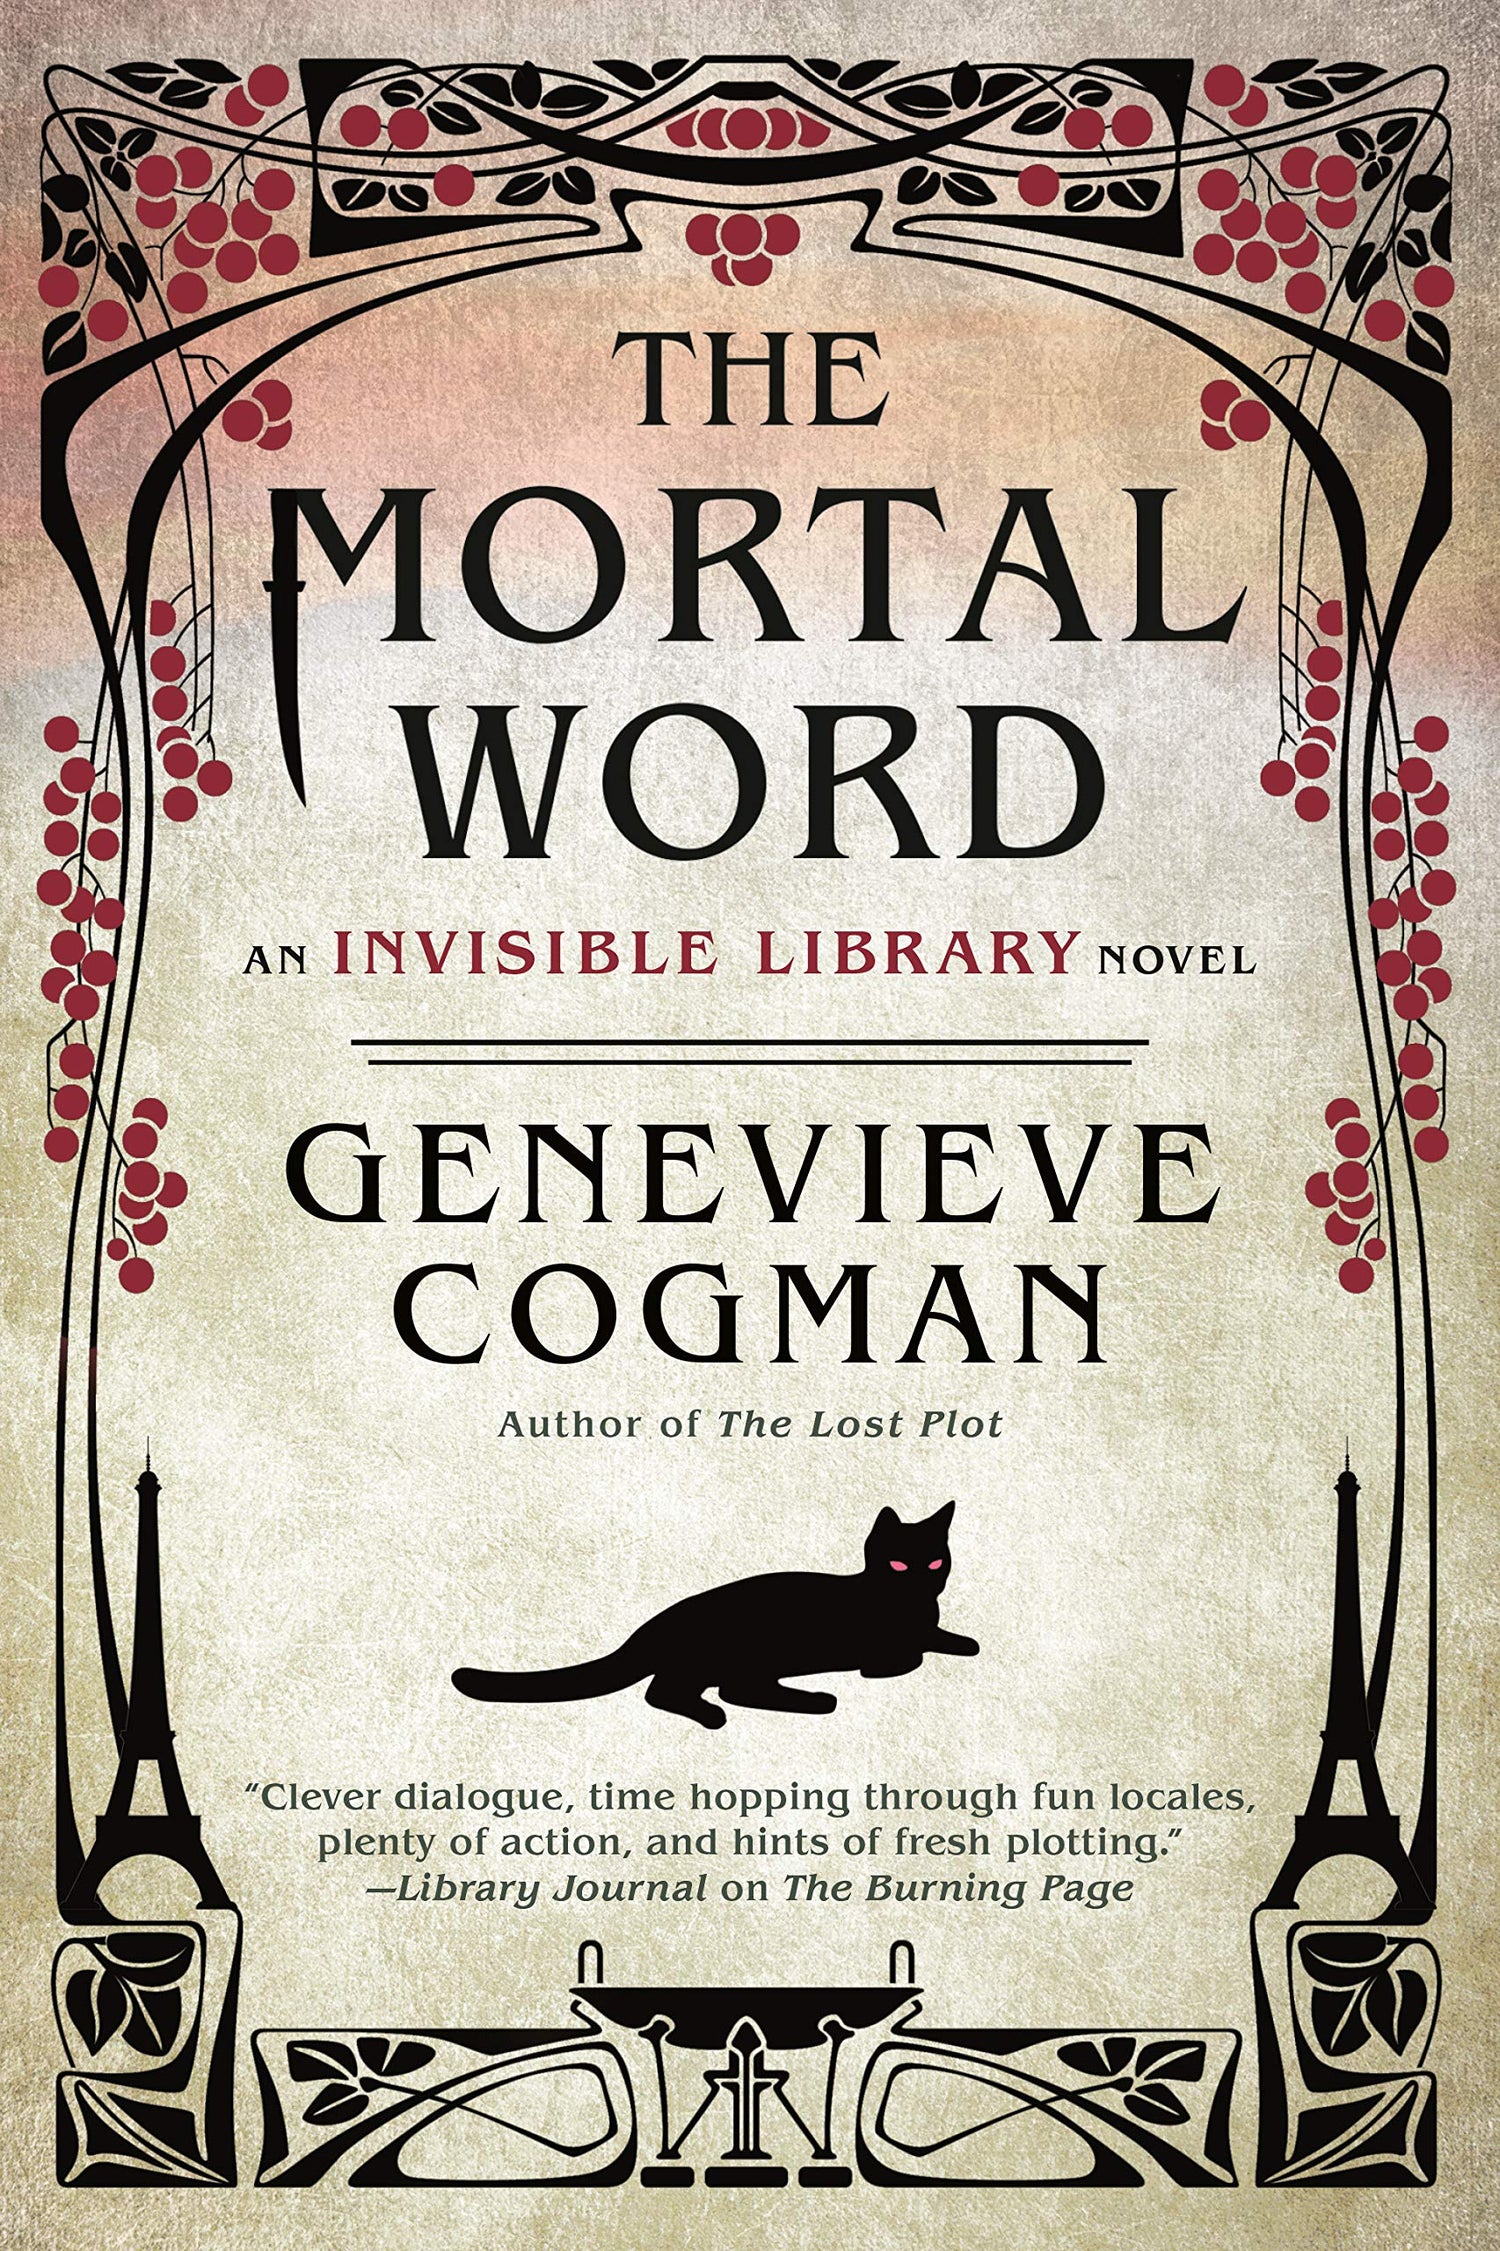 The Mortal Word (The Invisible Library Novel) - D'Autores